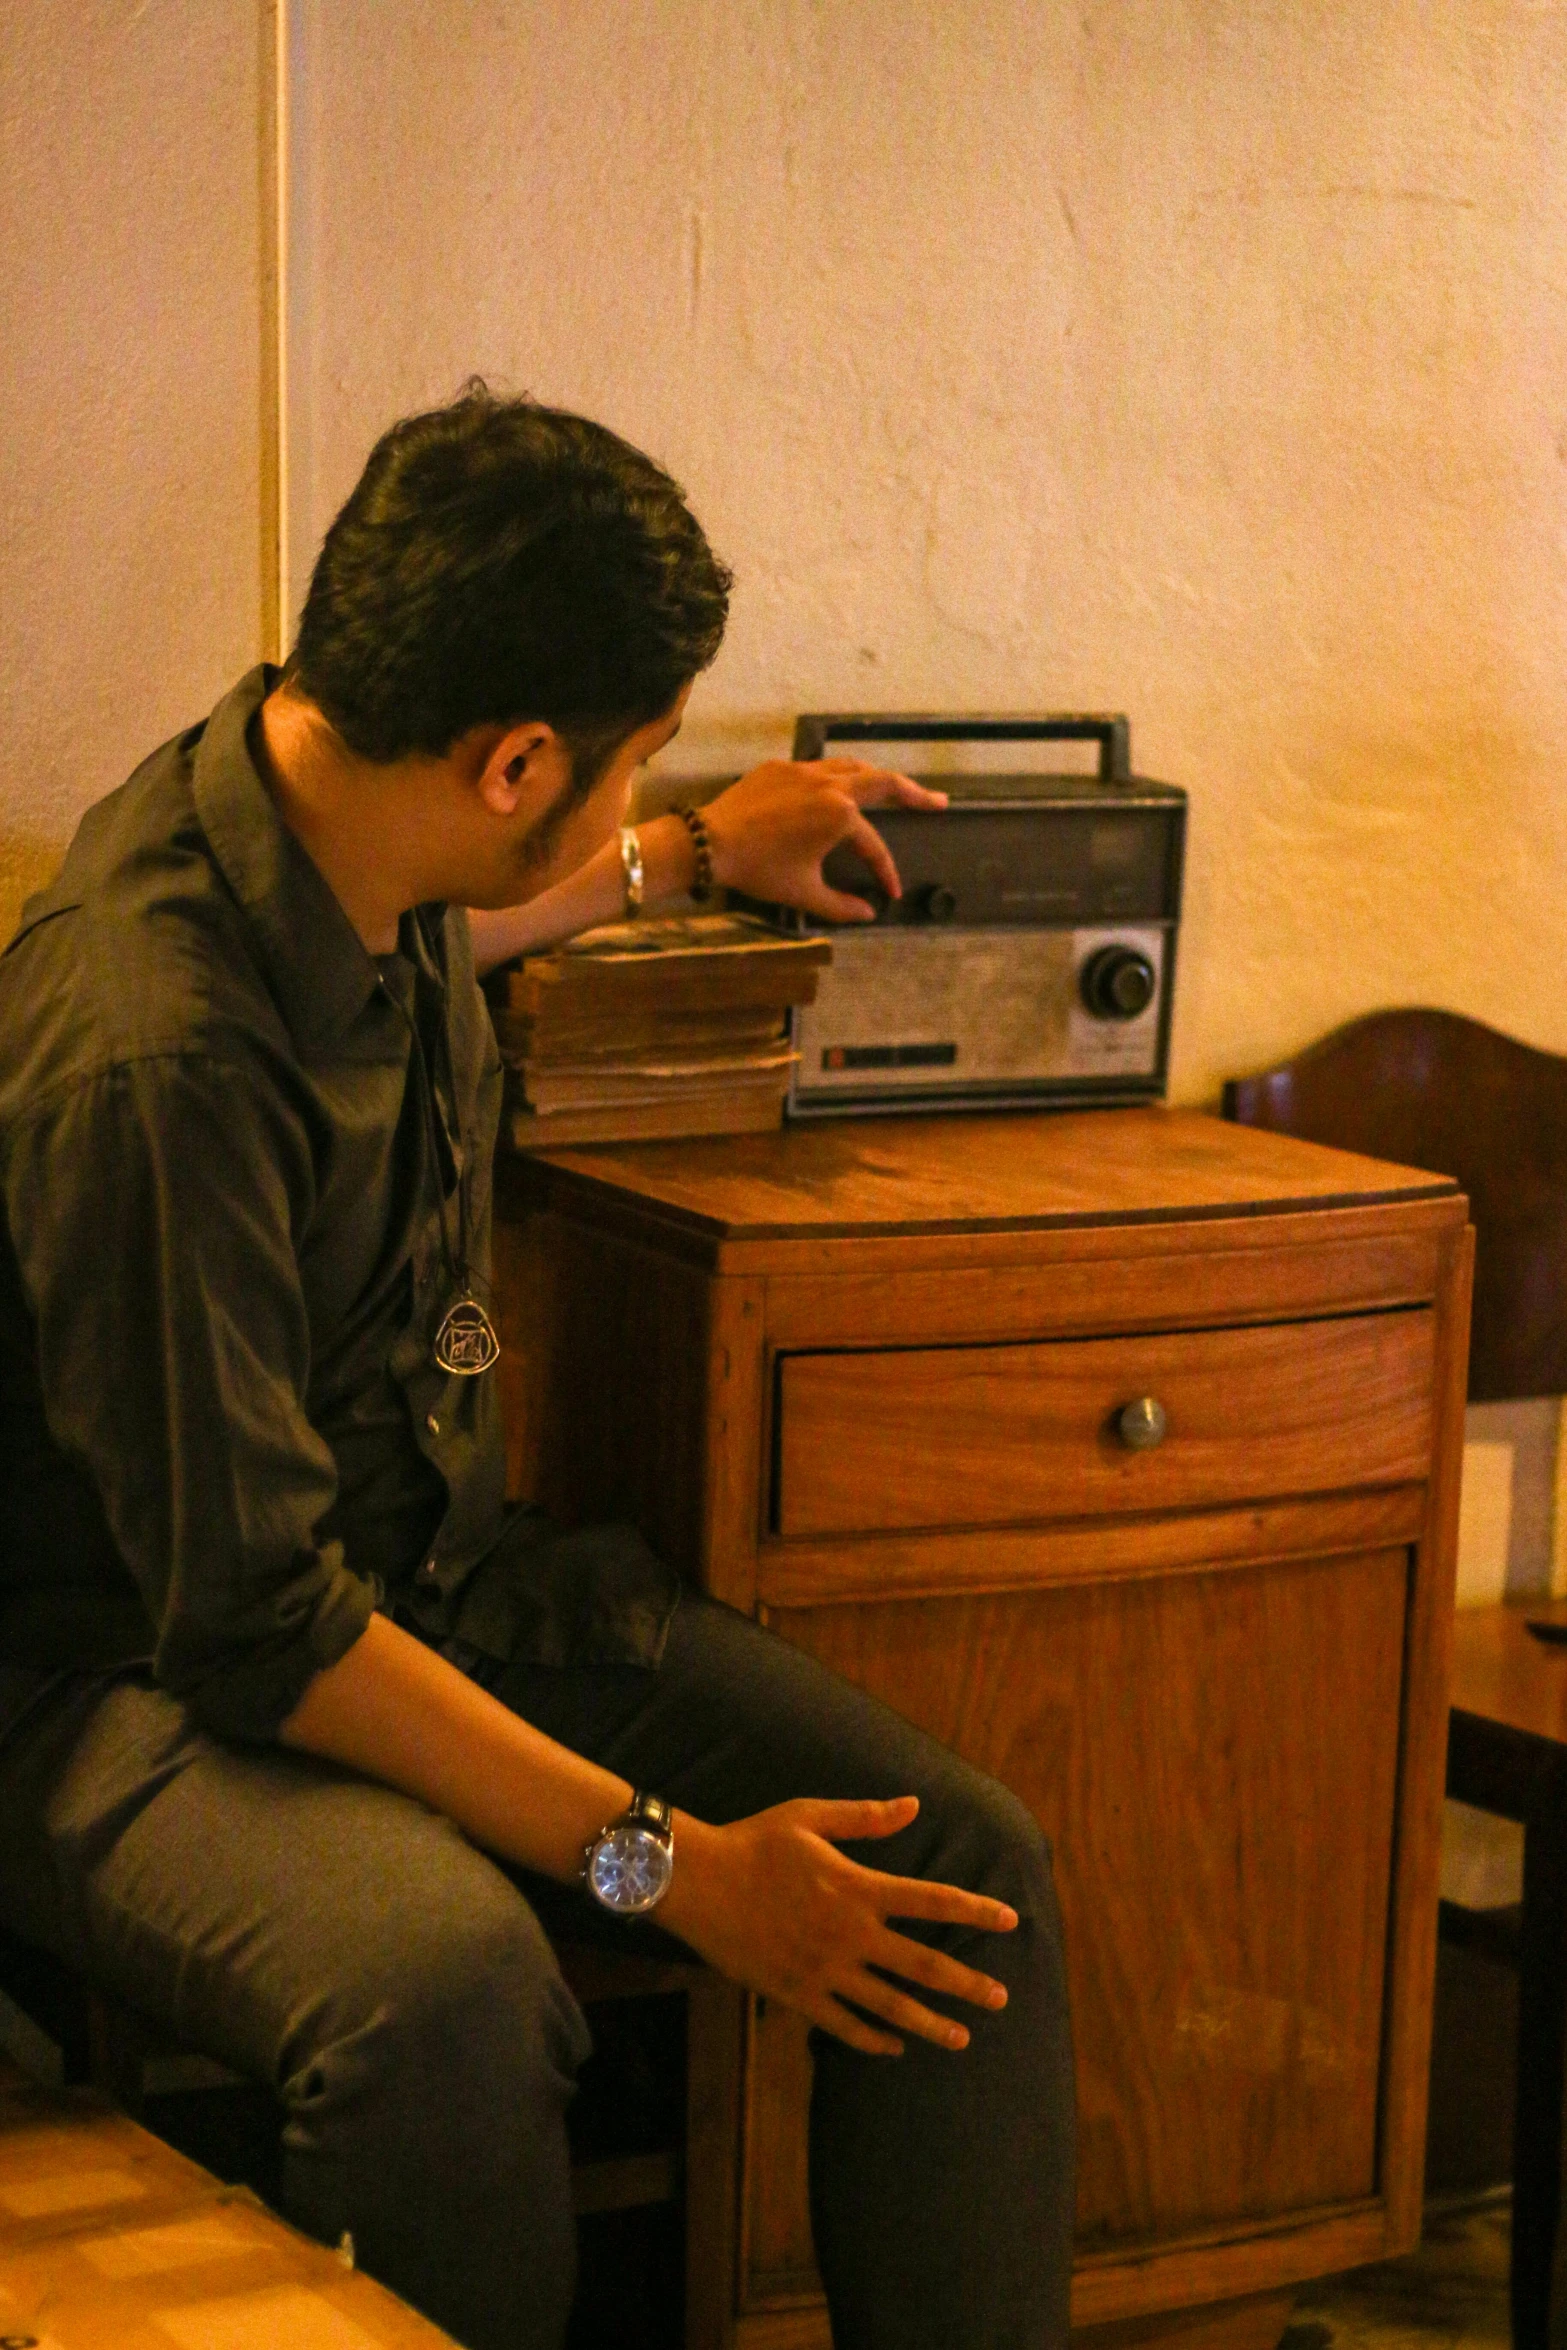 a person sitting on a wooden chair looking at a radio